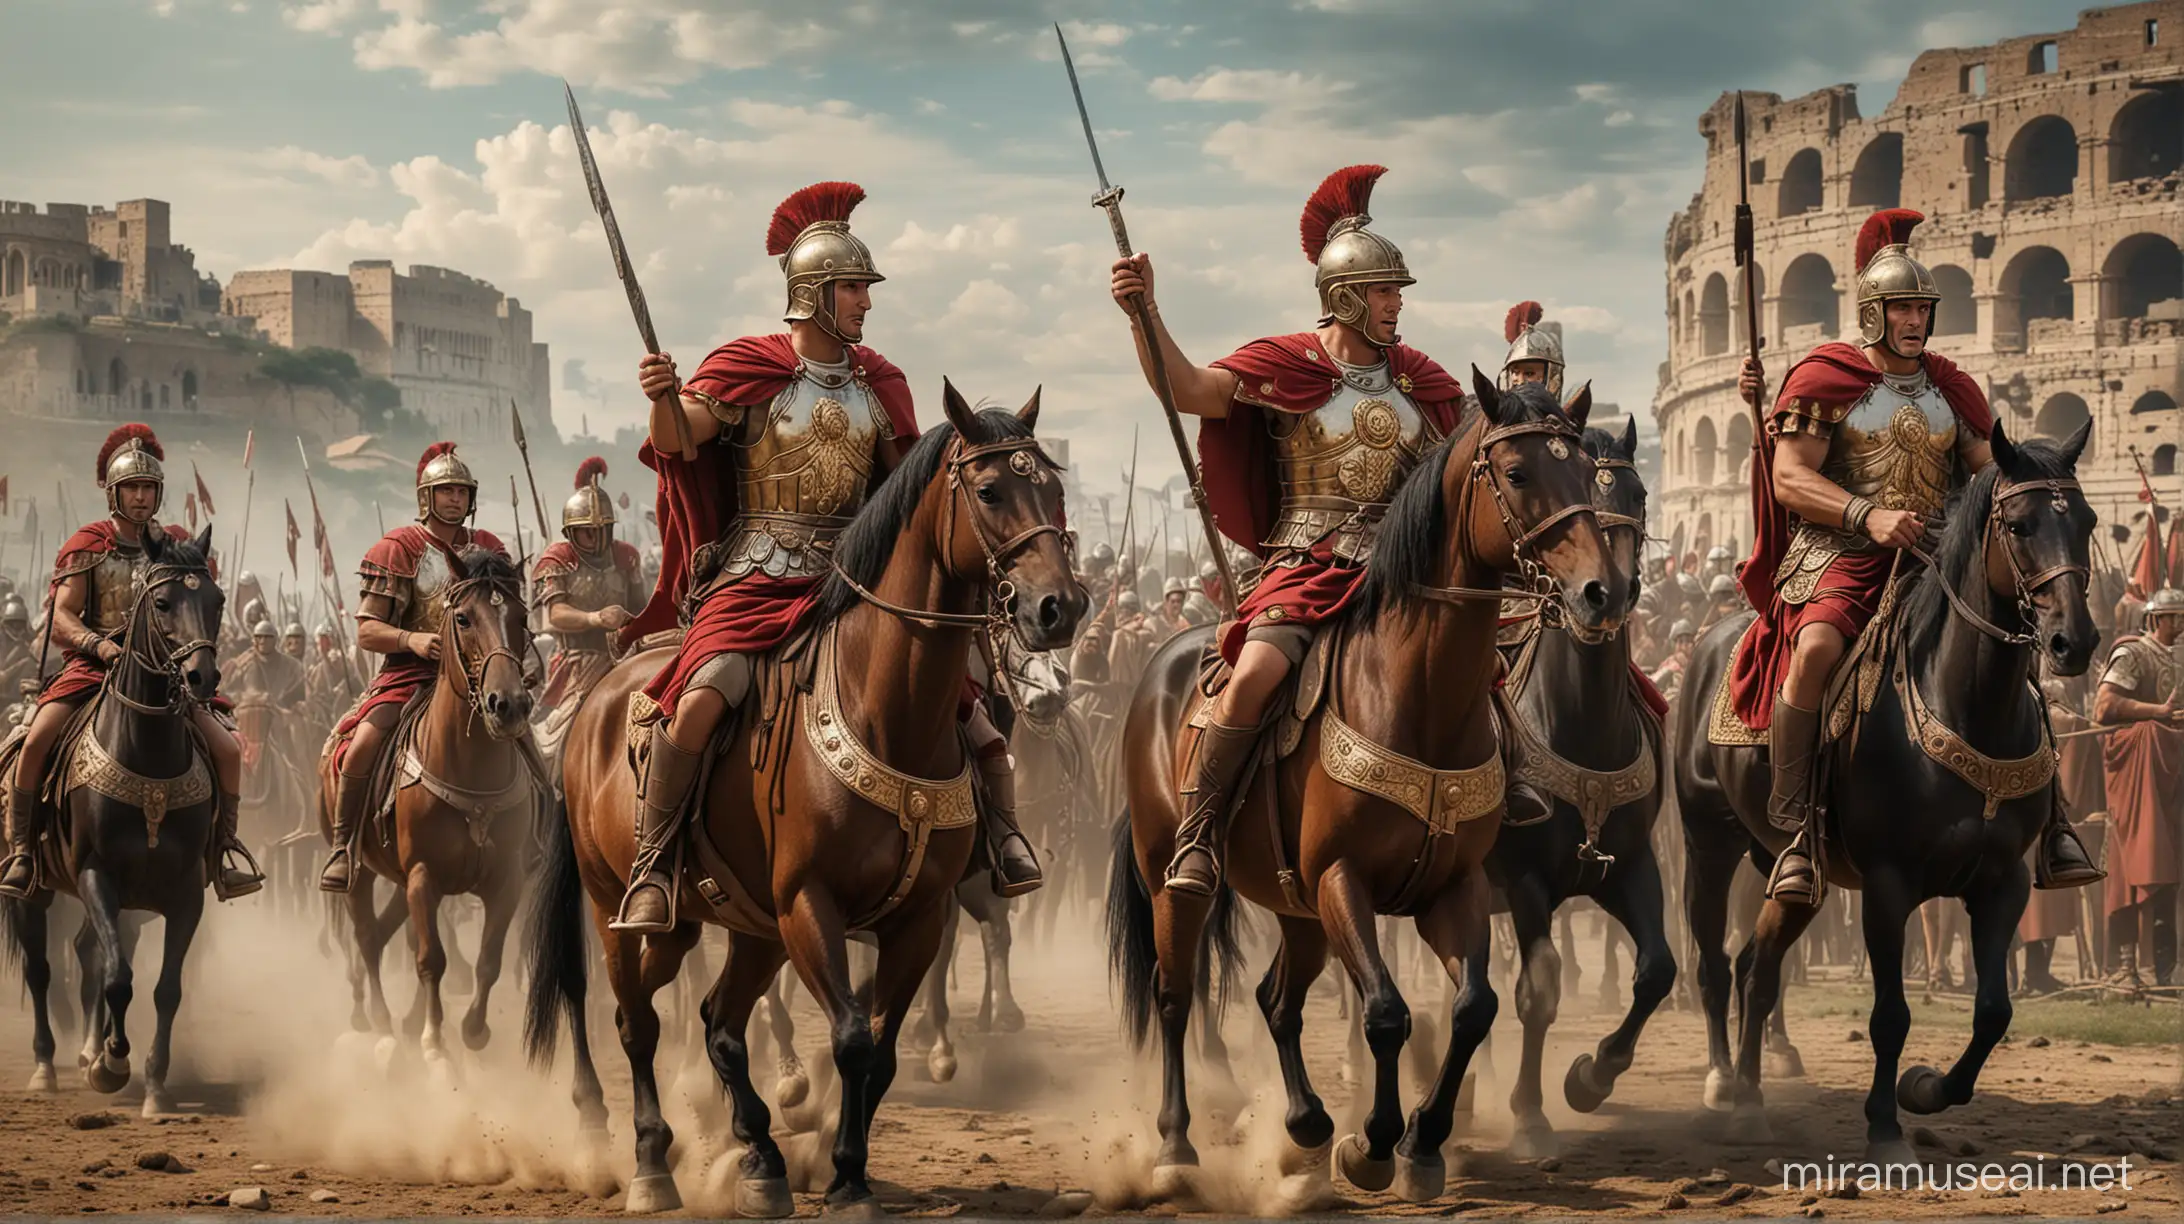 Roman Soldiers Riding Horses in the Majestic Roman Empire